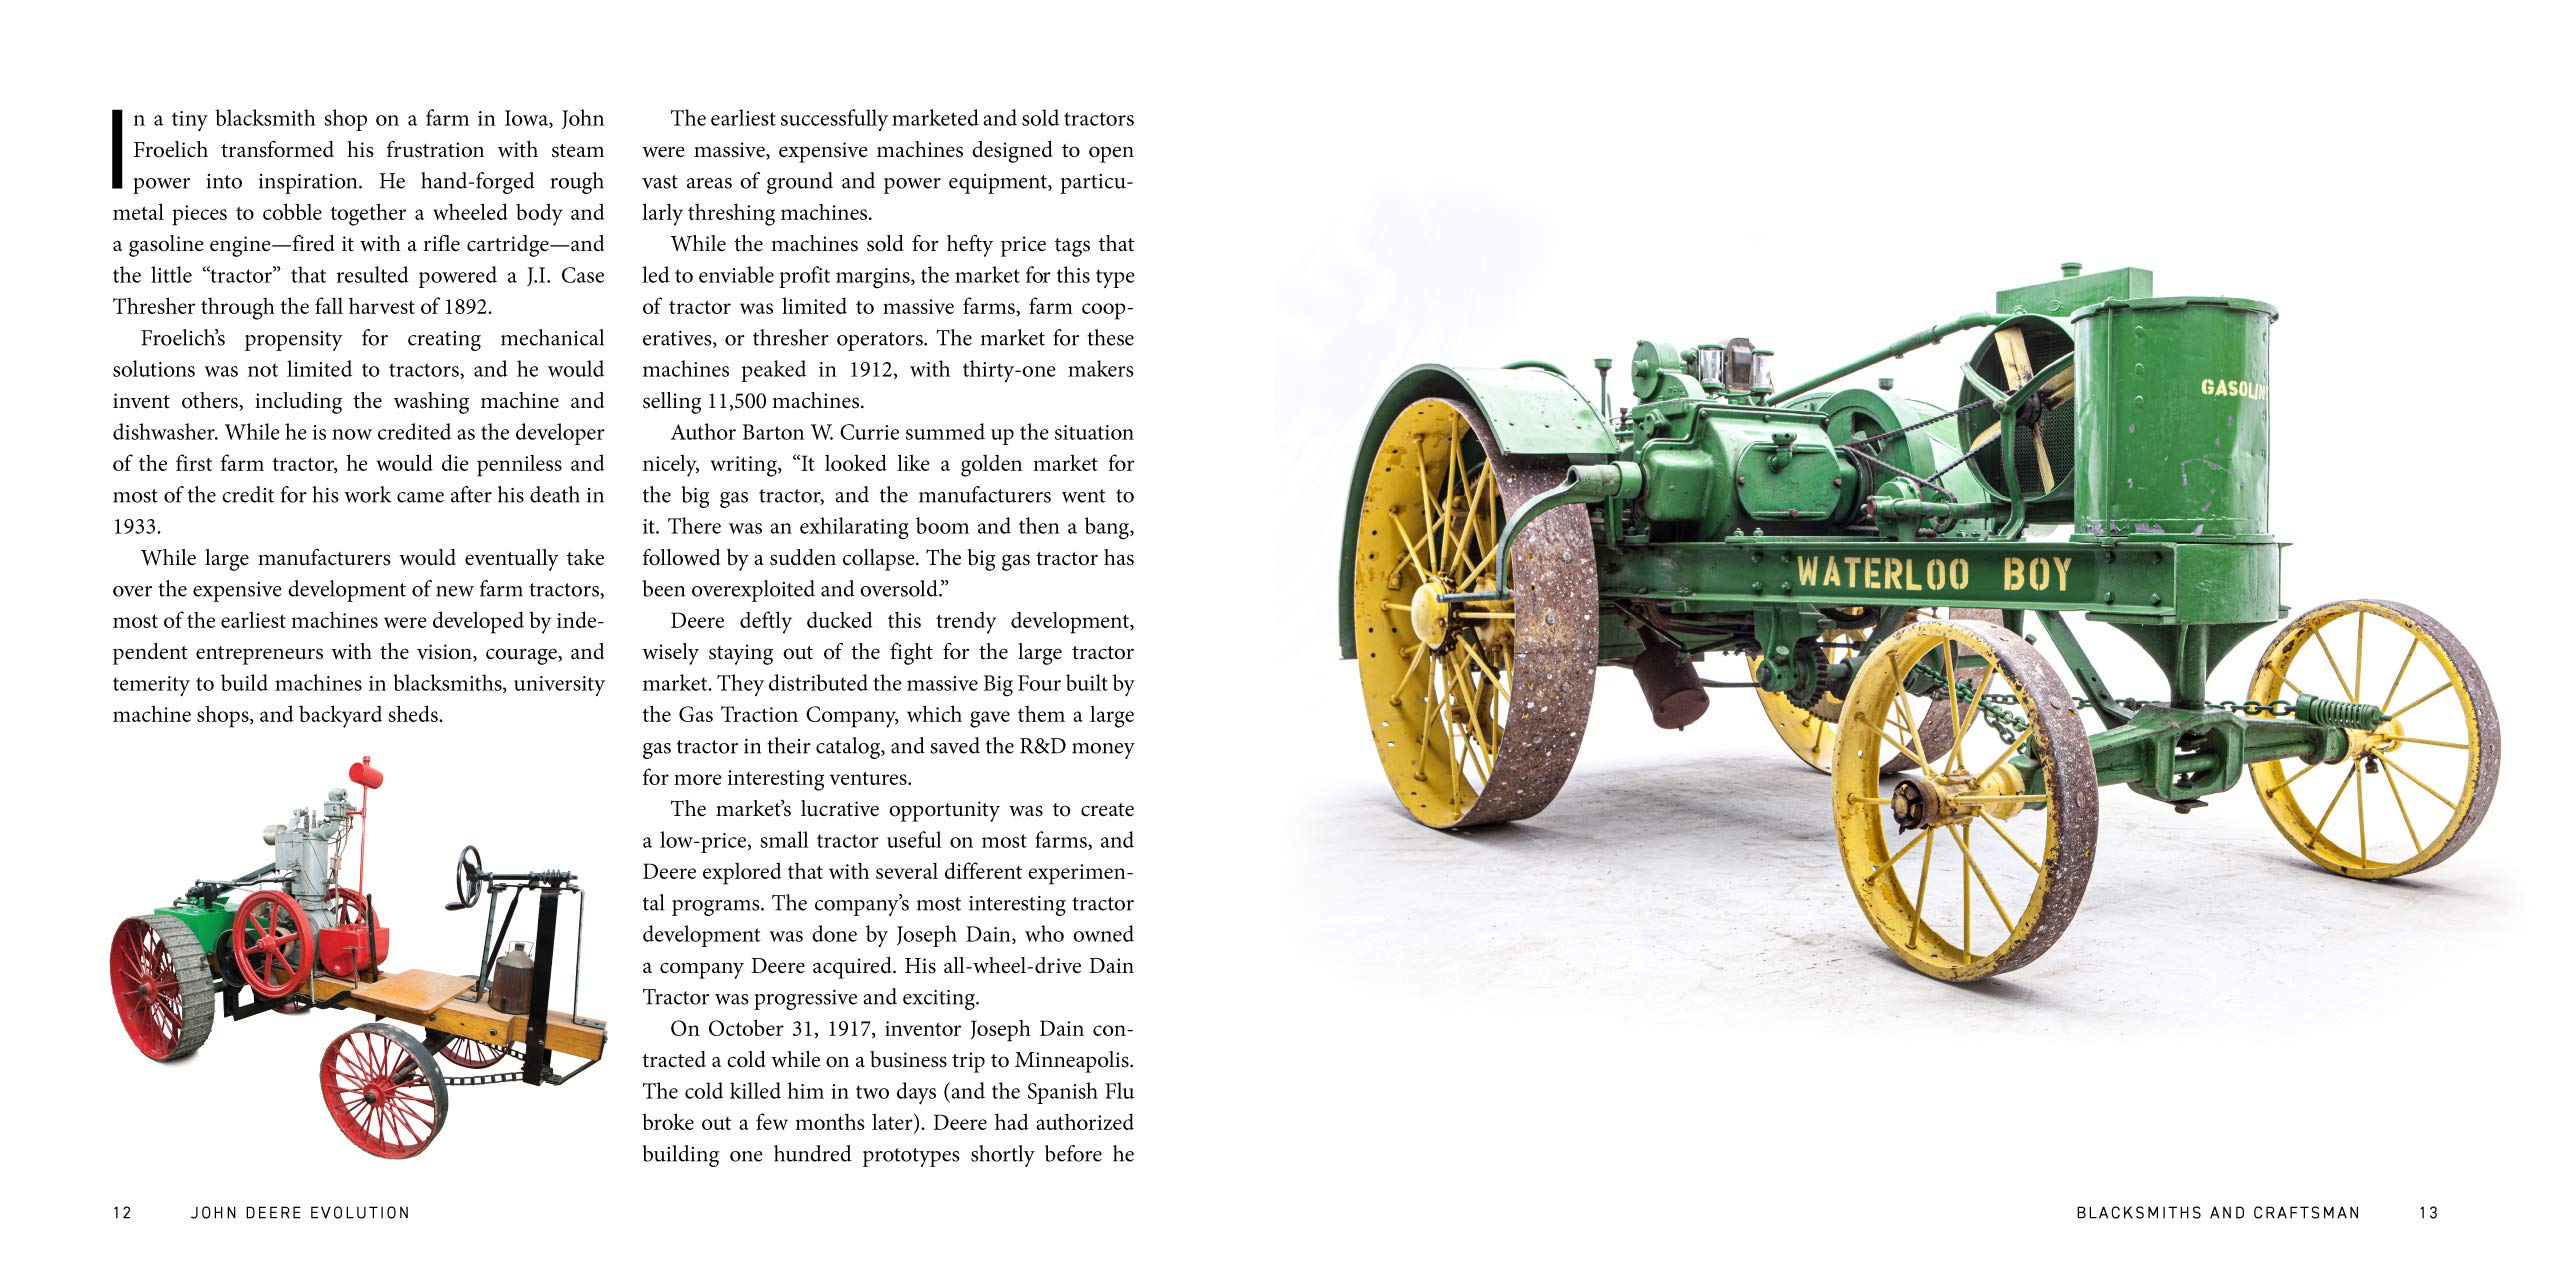 John Deere Evolution: The Design and Engineering of an American Icon